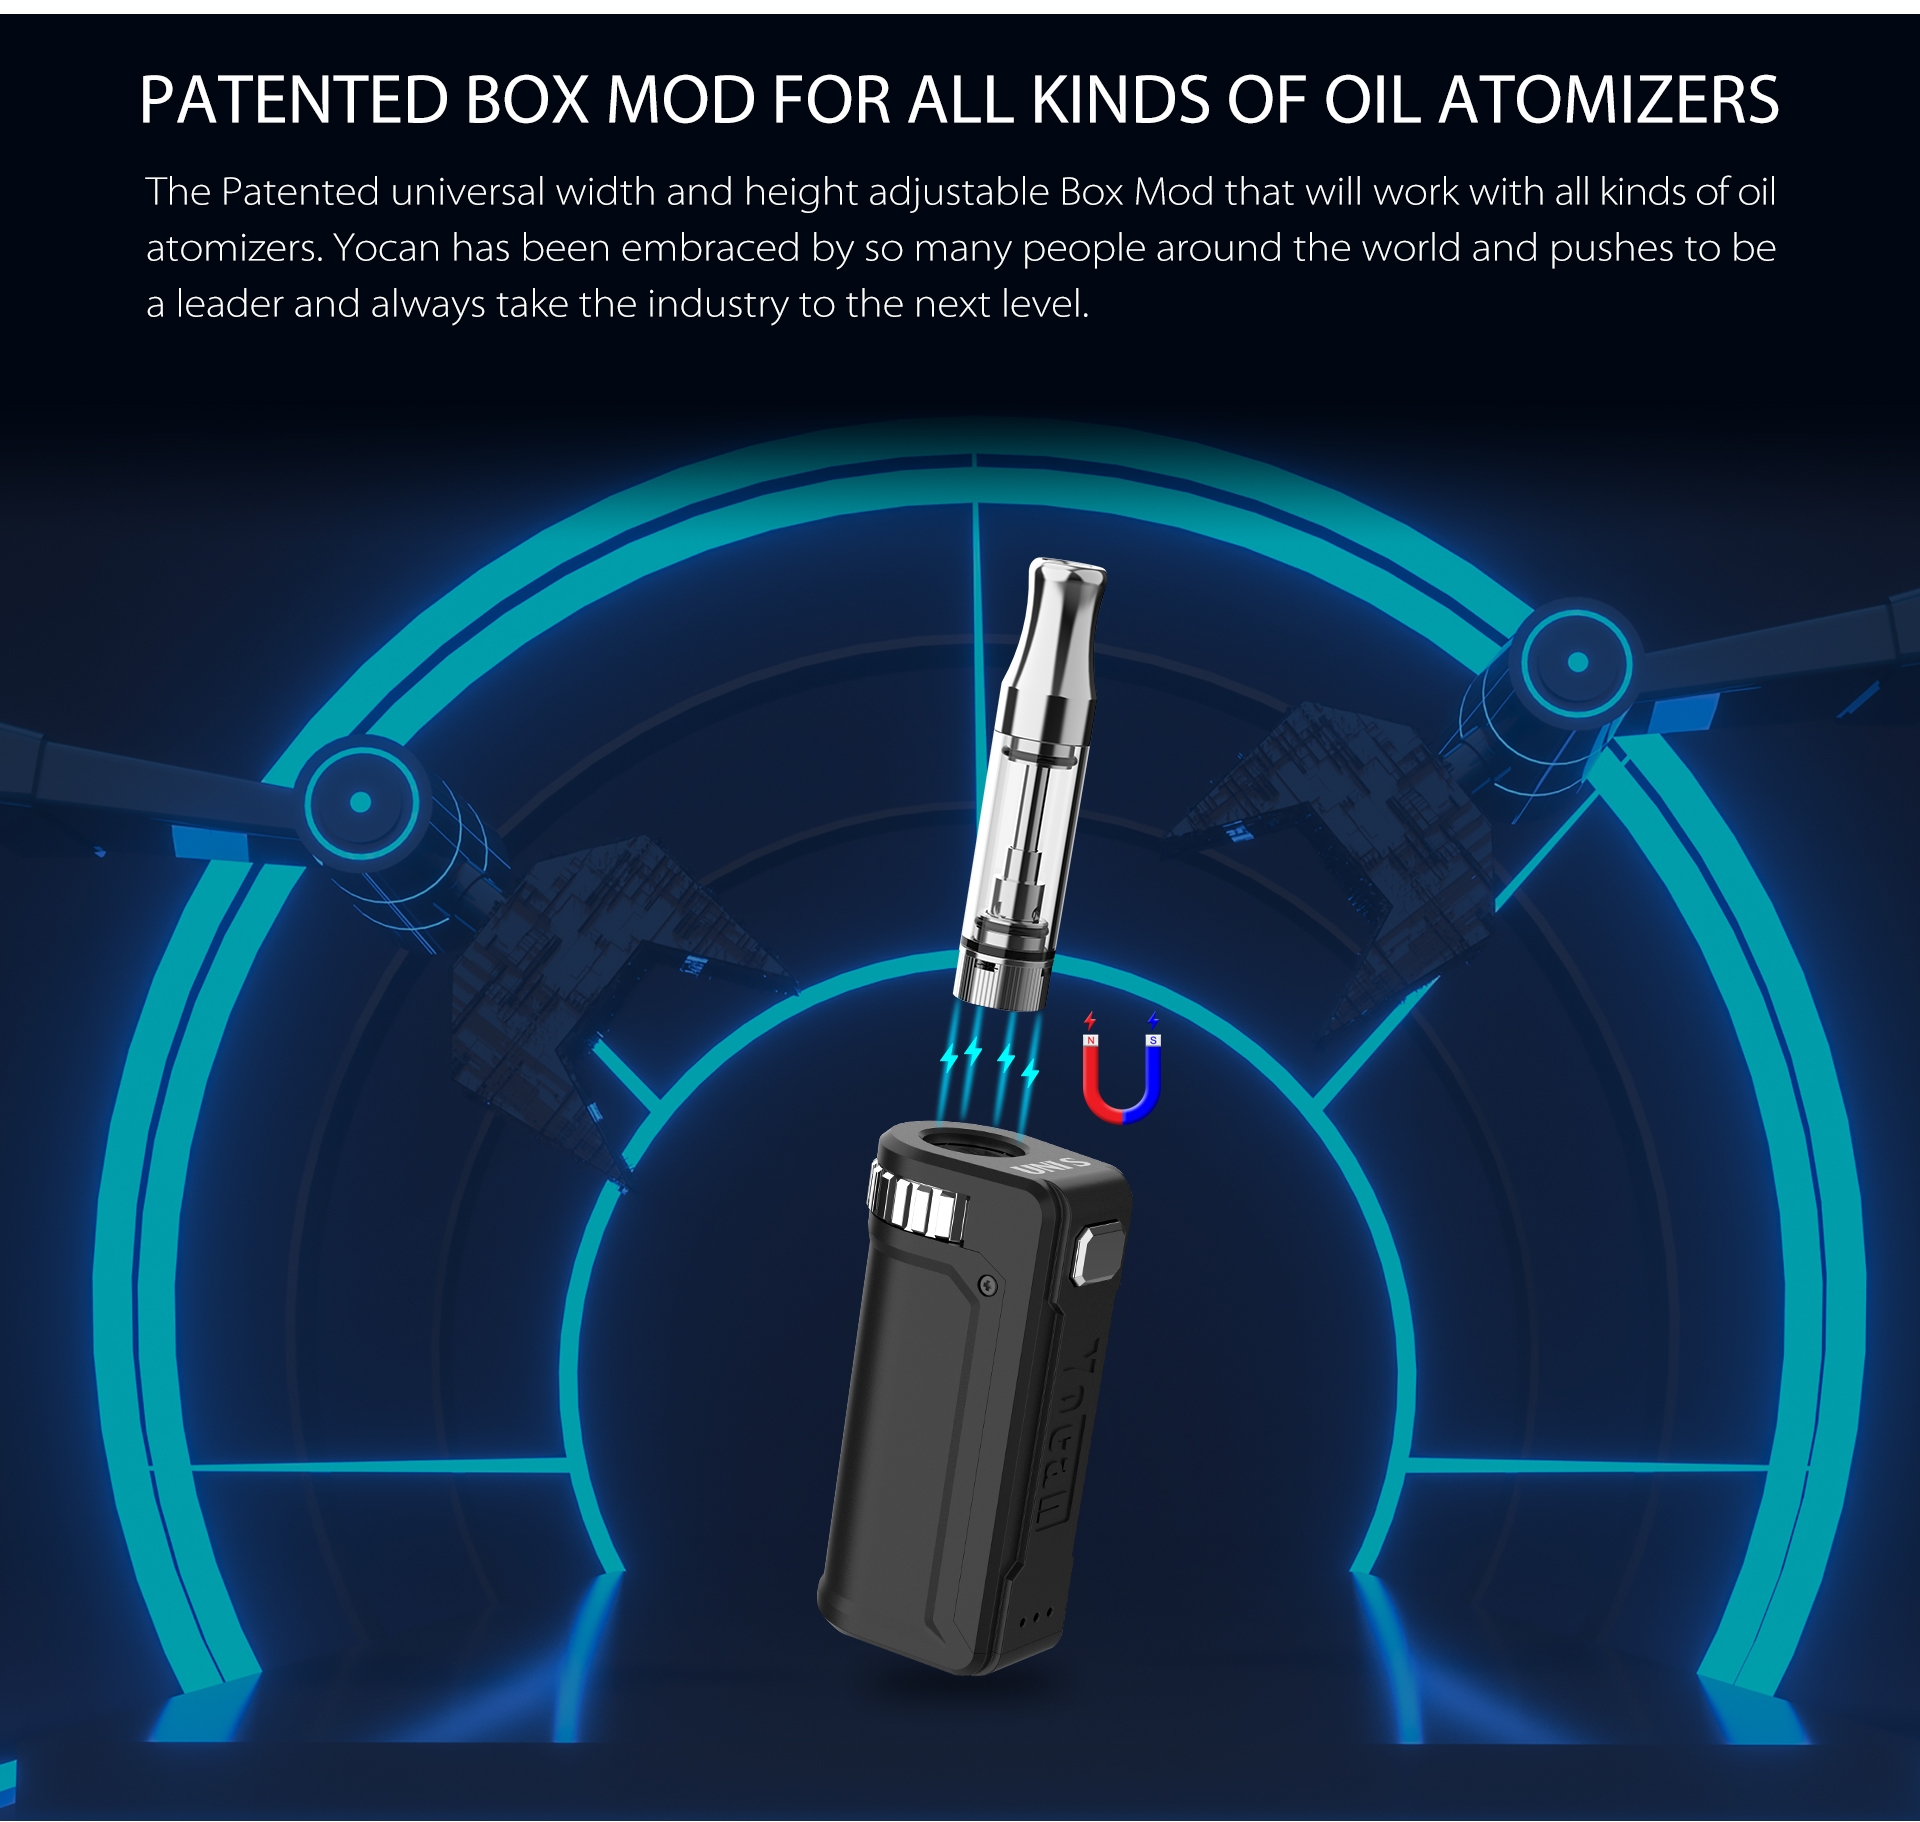 Yocan UNI S Patented Box Mod For ALL Kinds of Oil Atomizers